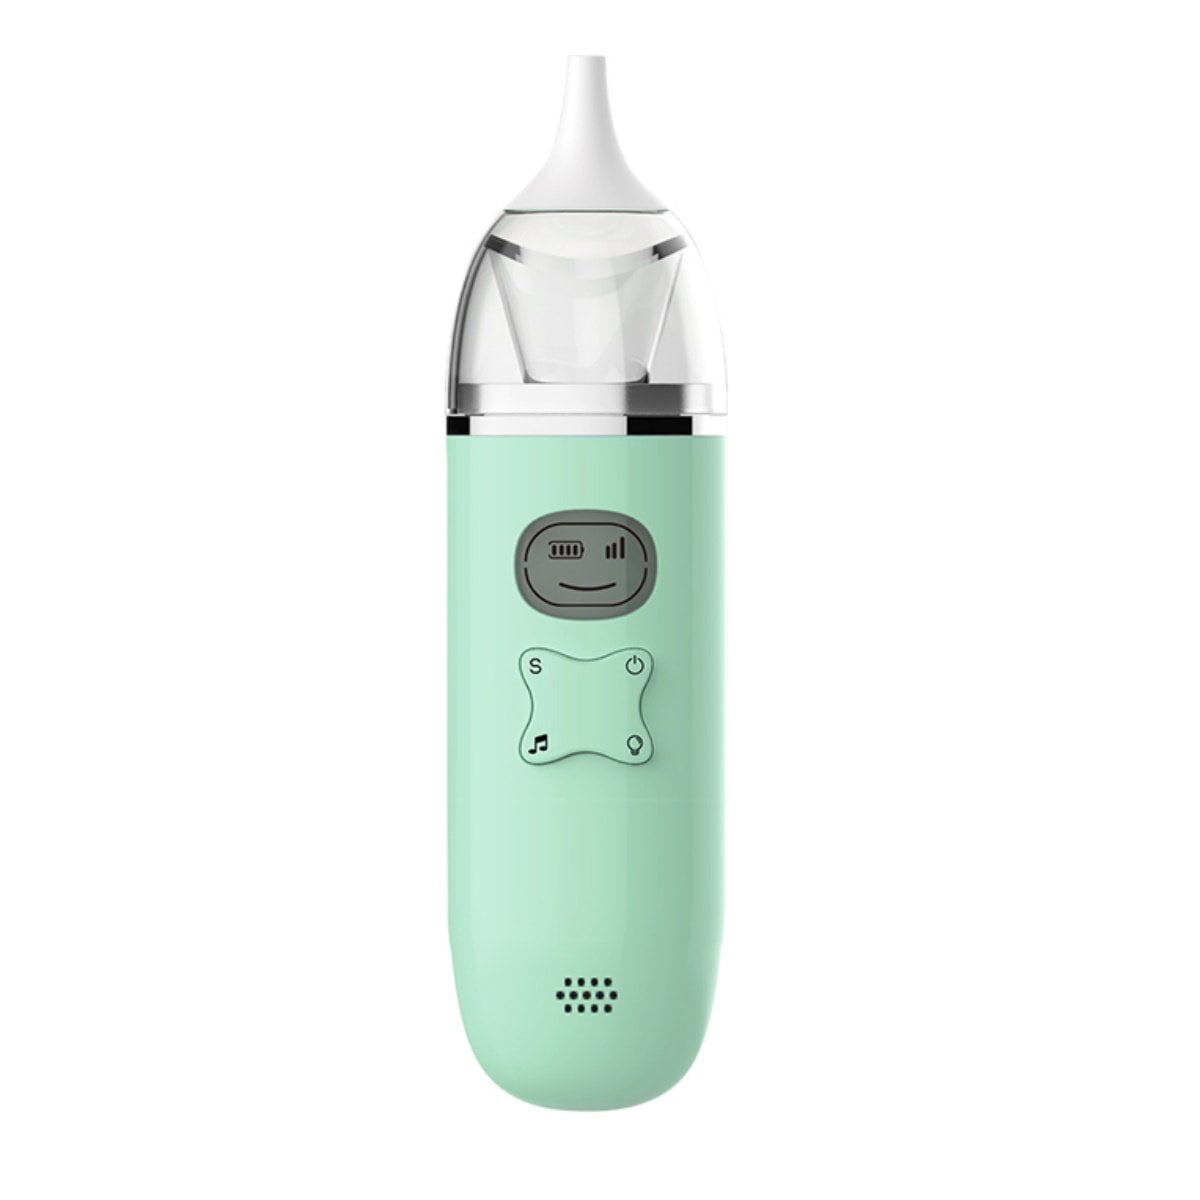 Thehomeuse Baby Nasal Aspirator, Electric Baby Nose Sucker, Baby Nose  Cleaner with 3 Different Levels of Suction, USB Rechargeable Snot Sucker  for